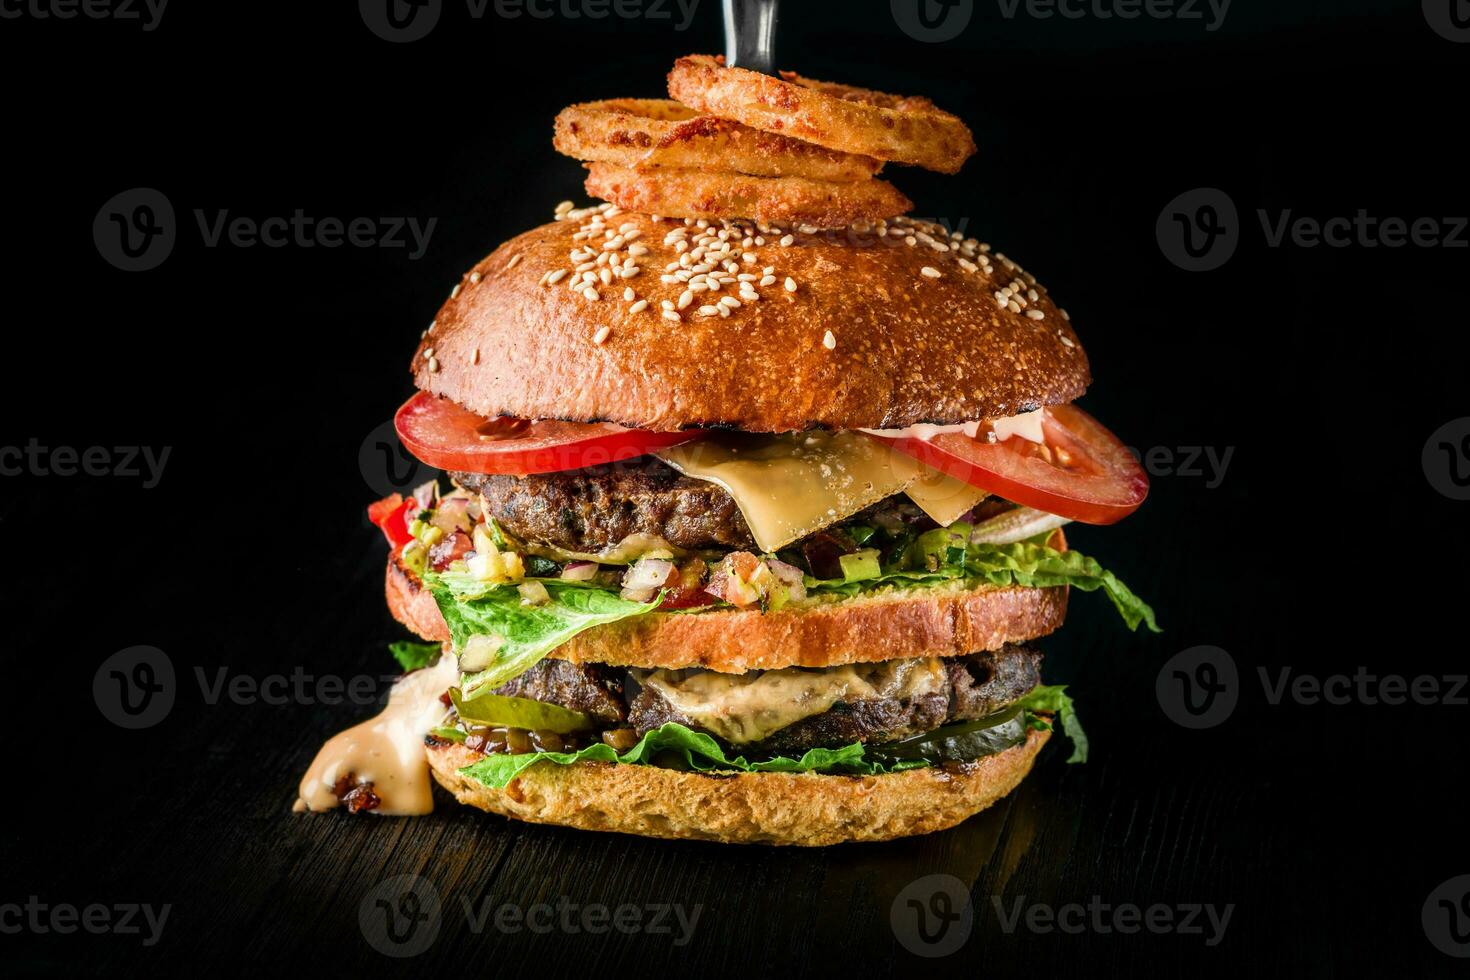 Cheese burger with grilled meat, cheese, tomato and with onion rings on dark wooden surface. Ideal for advertisement. Close-up photo